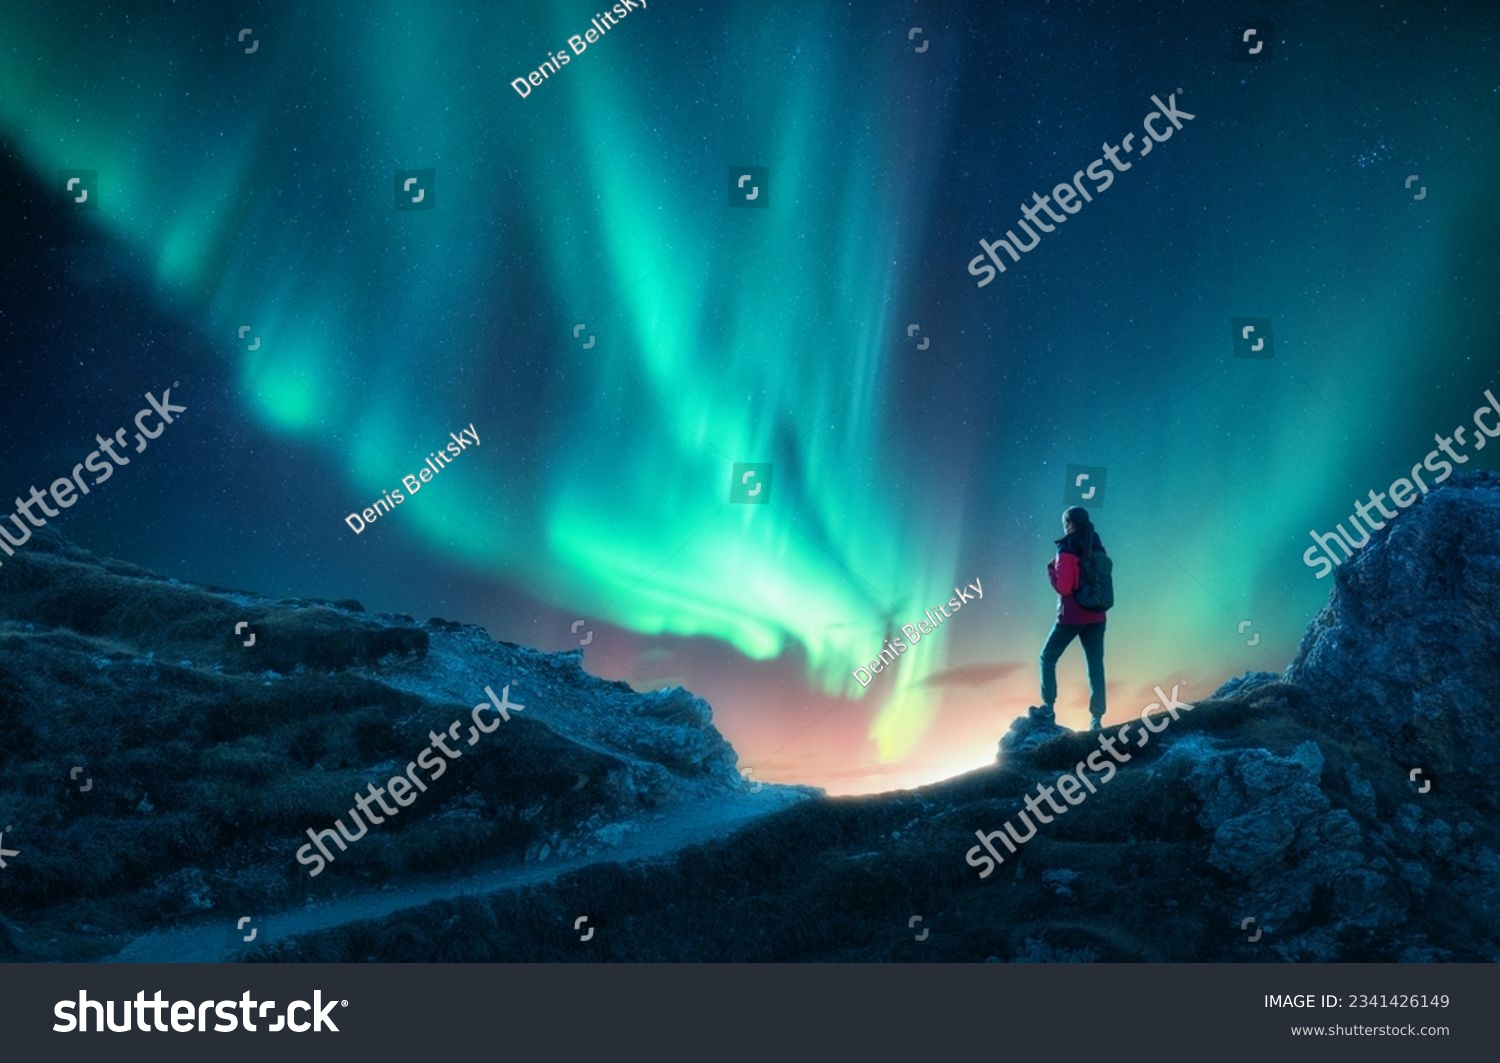 Northern lights and woman on mountain peak at night. Aurora borealis and silhouette of alone girl on mountain trail. Landscape with polar lights. Sky with stars and bright aurora. Travel background #2341426149